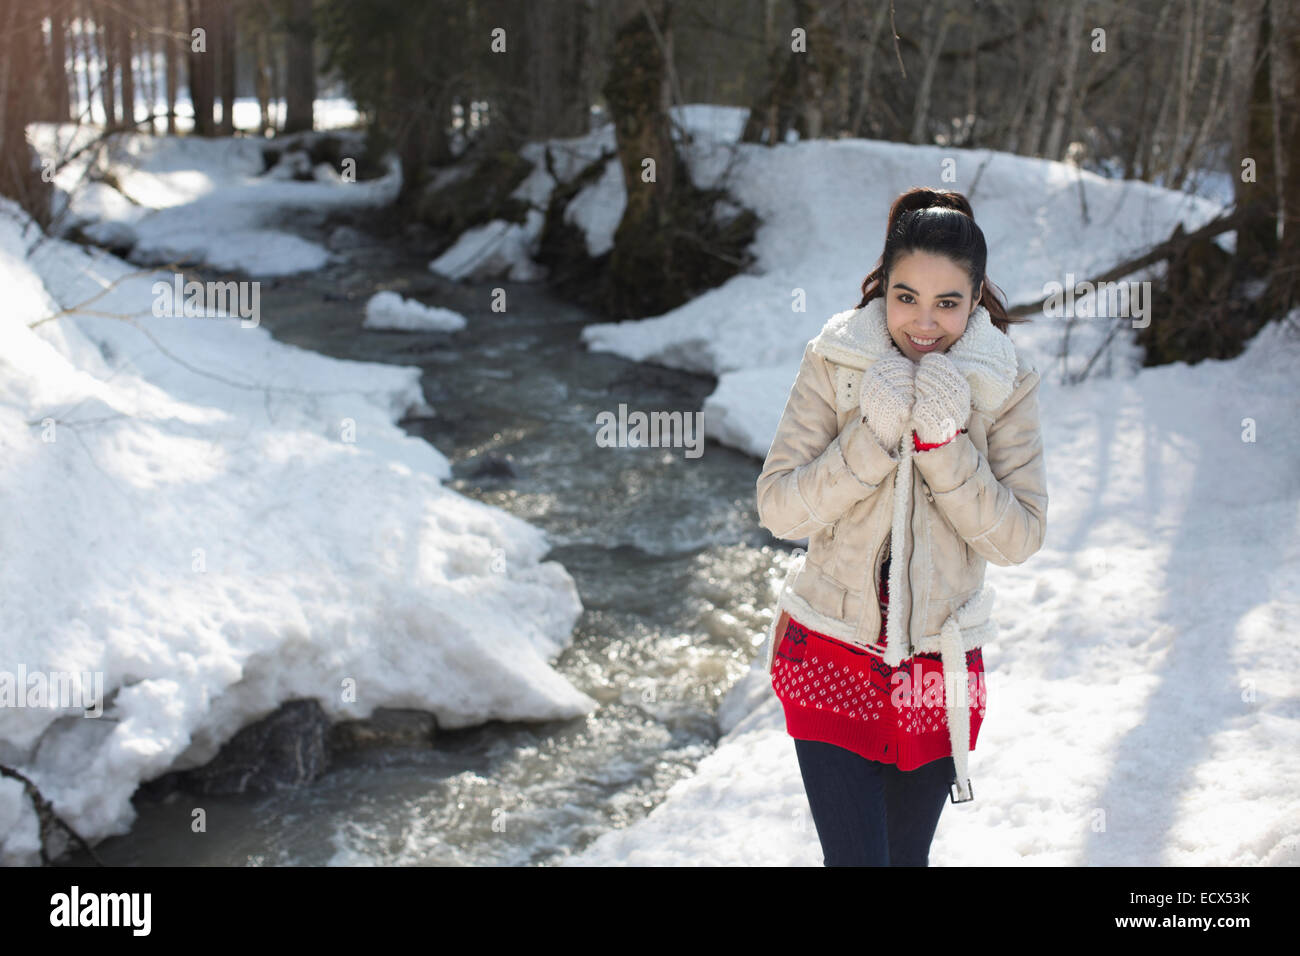 Portrait of smiling woman walking along snowy riverbank Banque D'Images